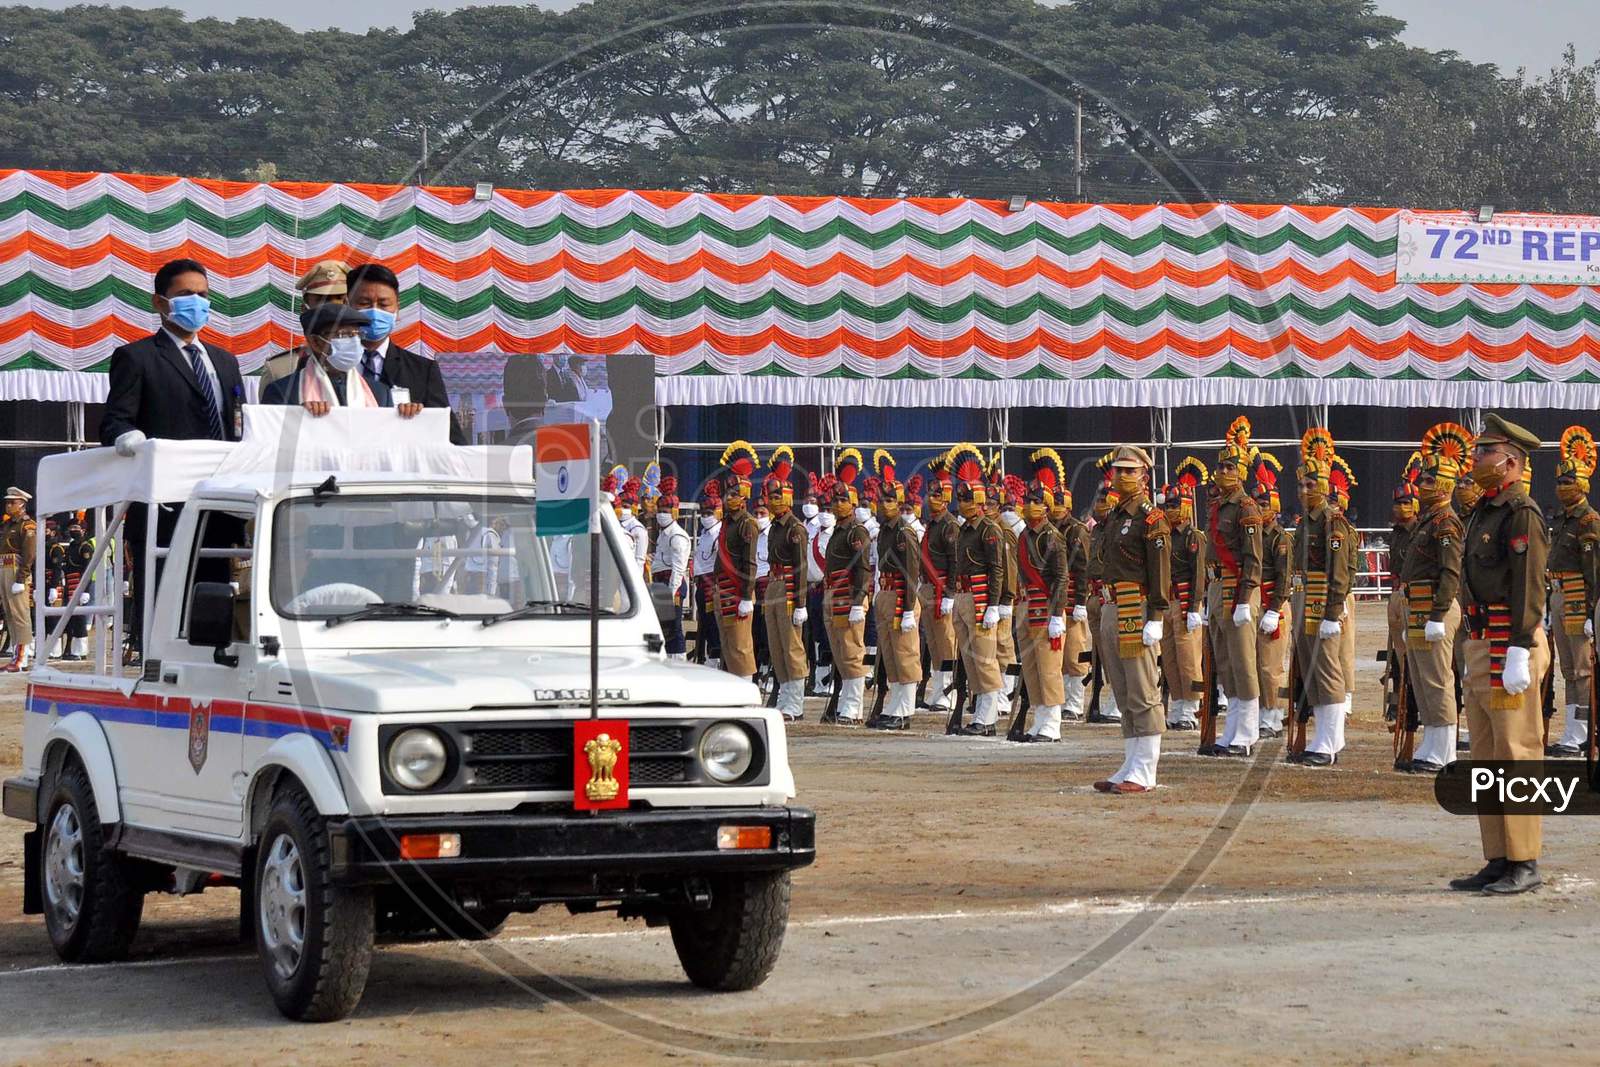 Governor of Assam Professor Jagdish  Mukhi inspects the guard of honour on the occasion of the Republic Day at Veterinary ground in Guwahati  on Jan 26,2021.